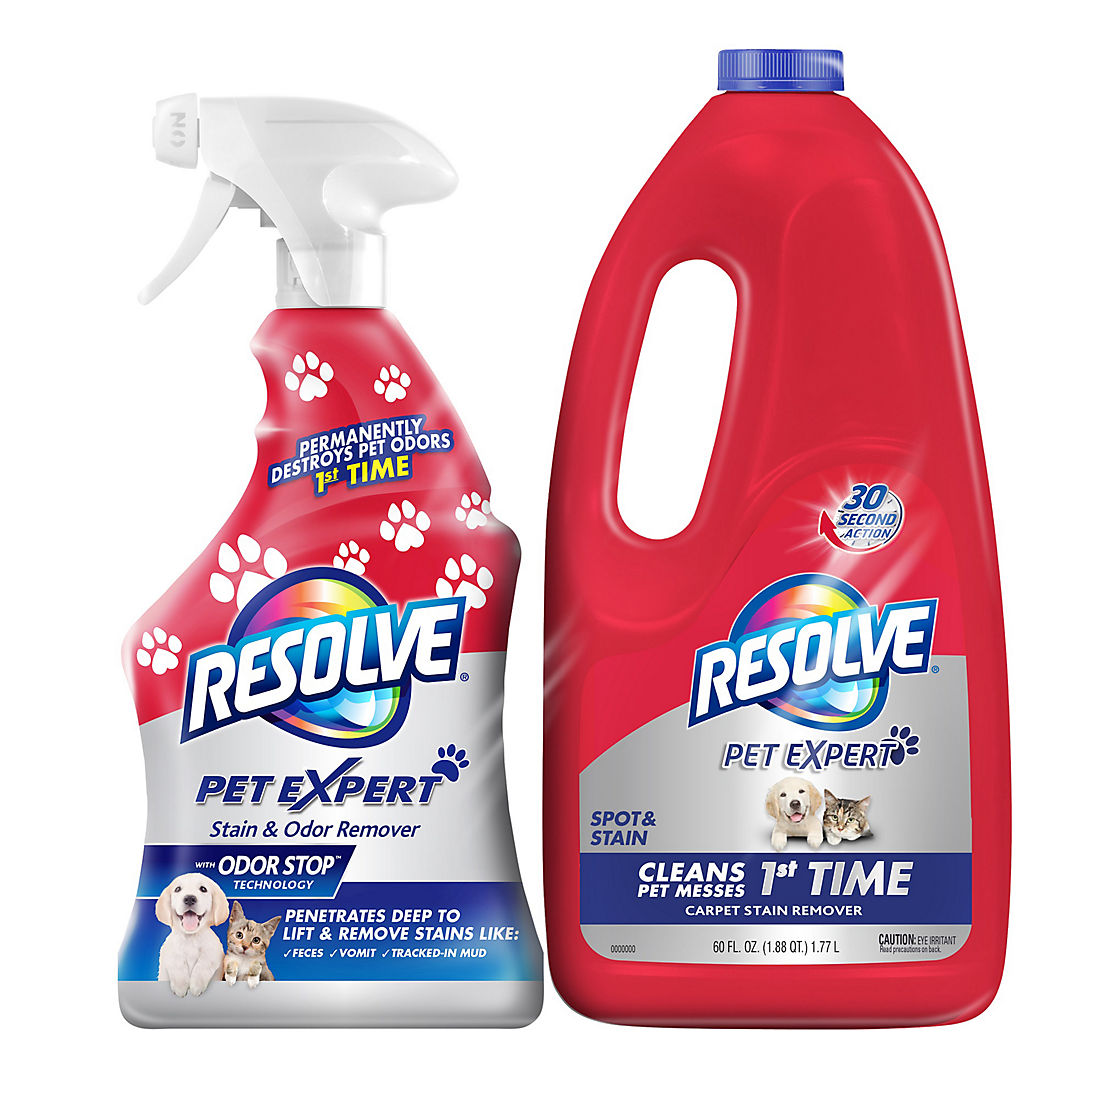 Resolve Pet Expert 22 Oz Trigger With 180 Refill Bj S Whole Club